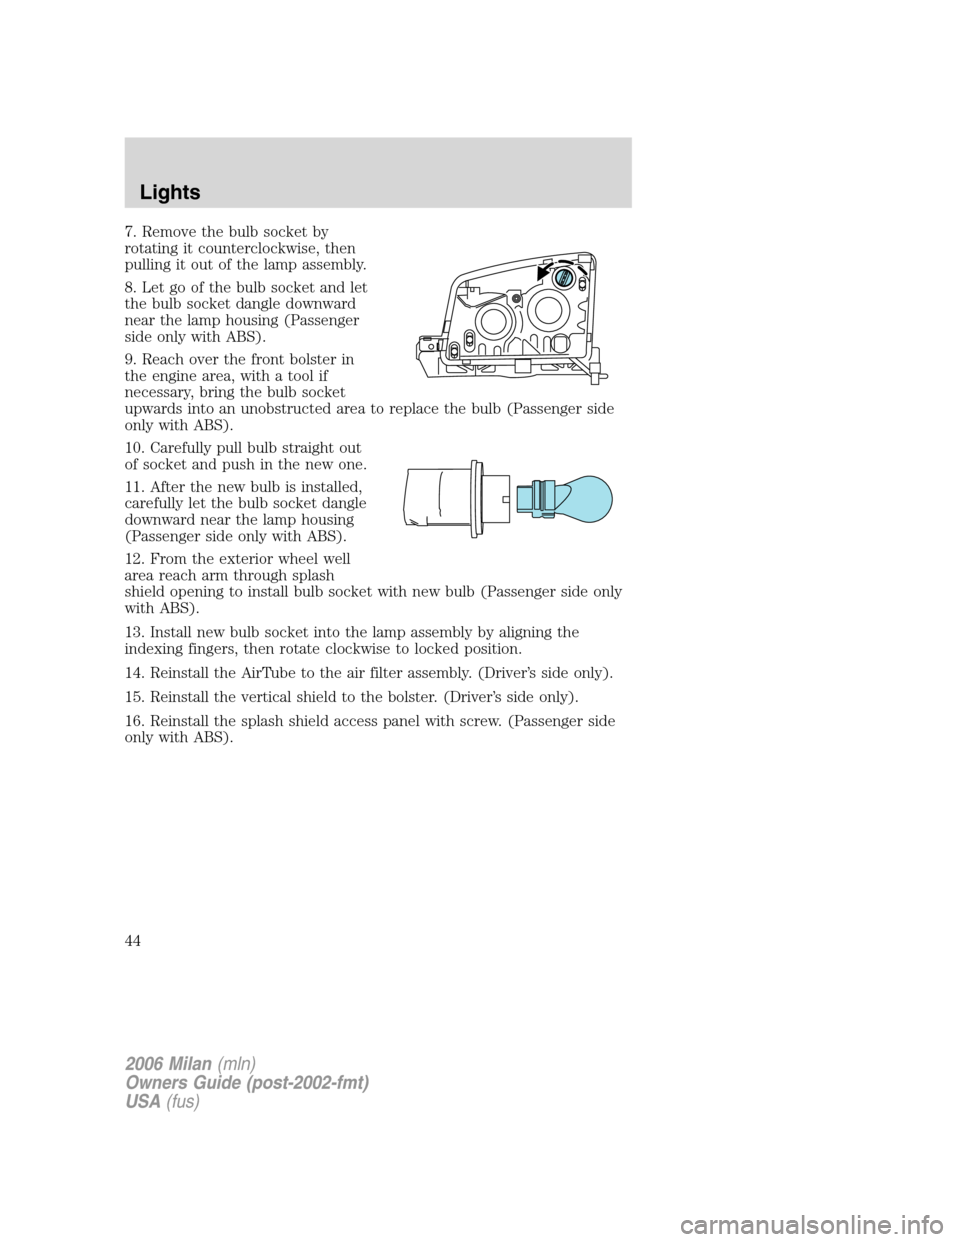 Mercury Milan 2006  Owners Manuals 7. Remove the bulb socket by
rotating it counterclockwise, then
pulling it out of the lamp assembly.
8. Let go of the bulb socket and let
the bulb socket dangle downward
near the lamp housing (Passeng